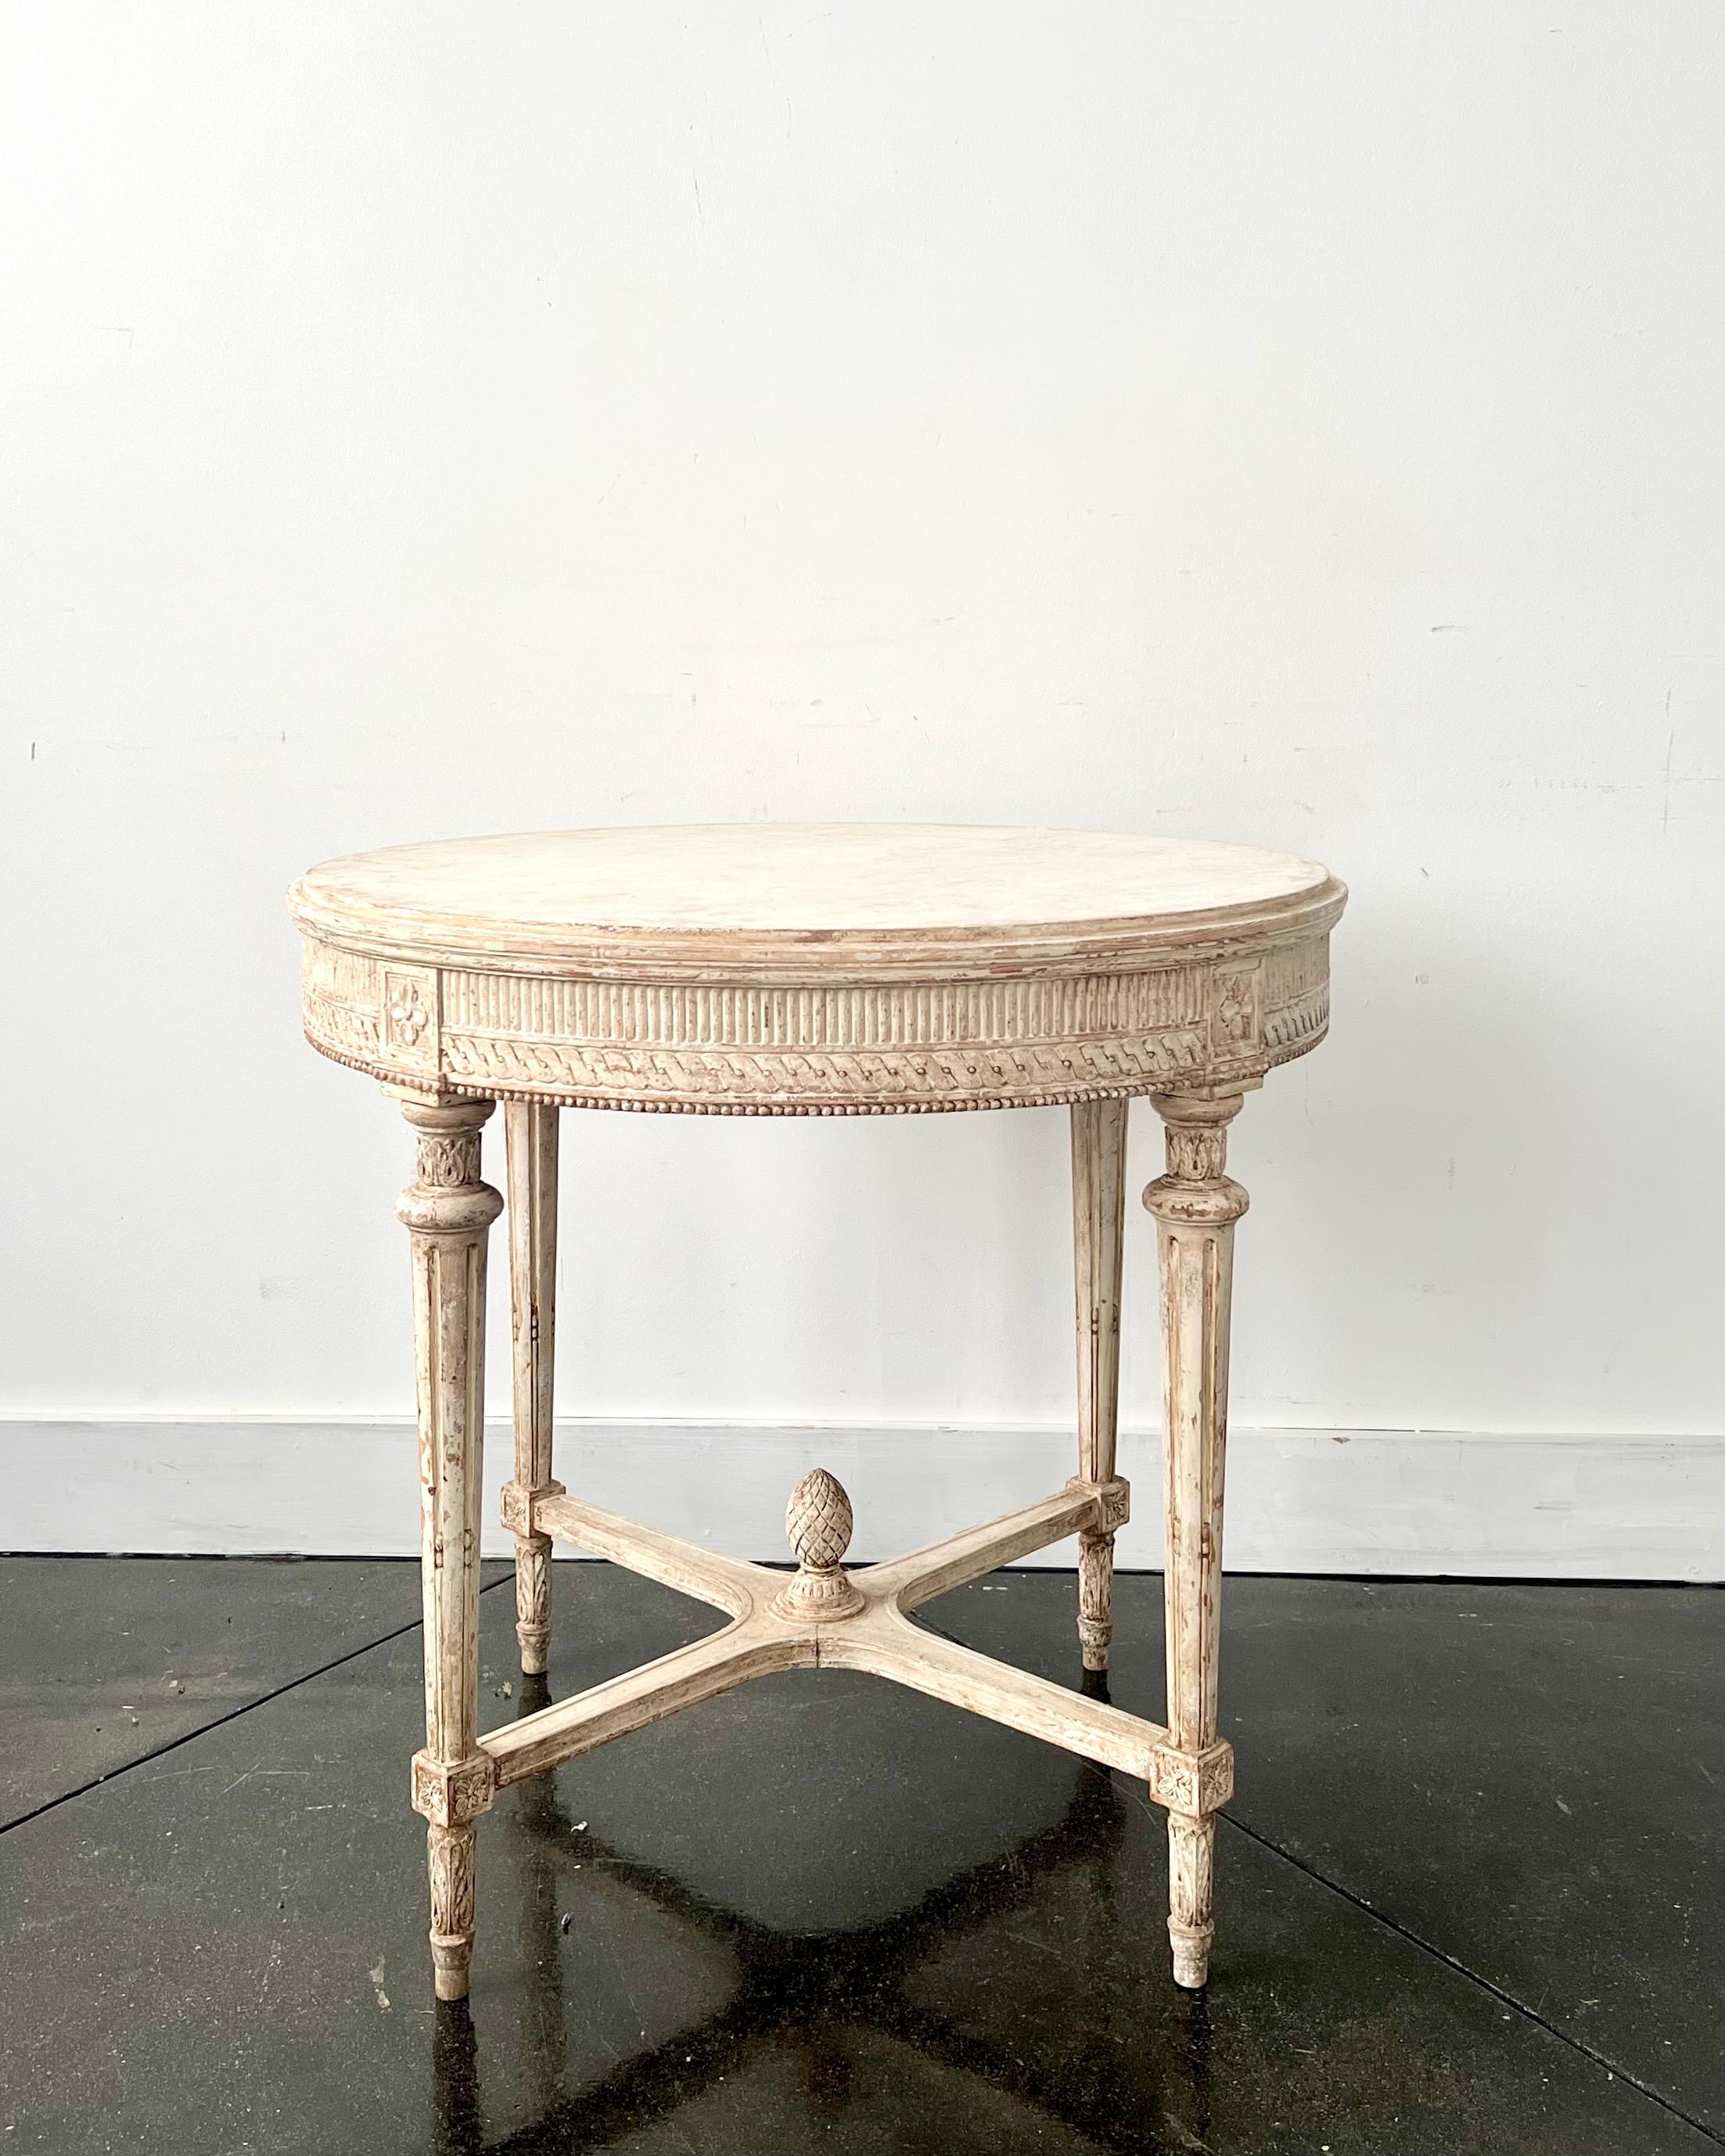 Swedish Gustavian style round center table with very richly carved apron, tapering carved legs and saltire strecher with central medallion in painted worn cream patina, Sweden, circa 1860.